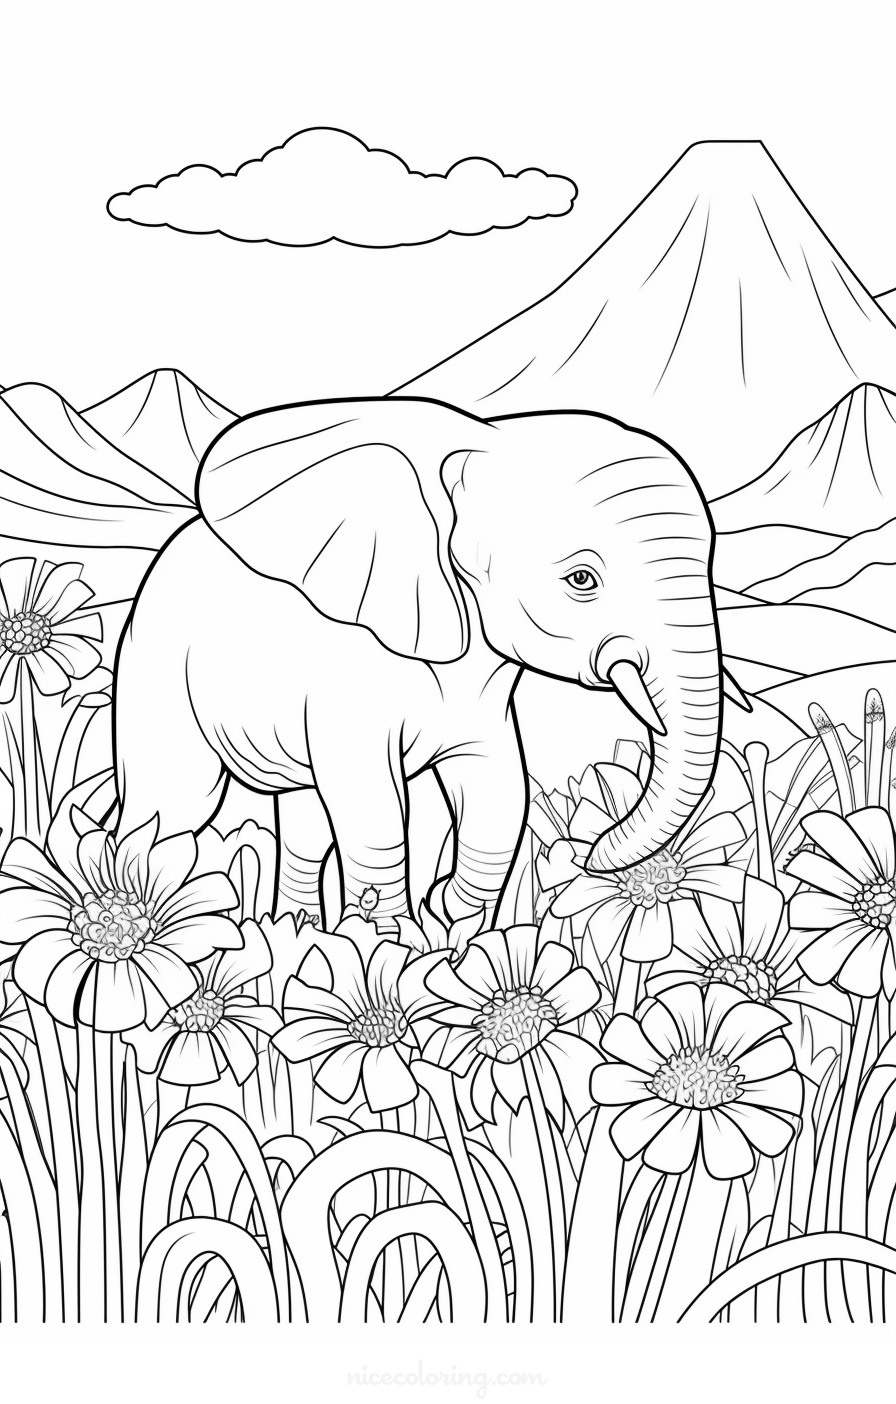 Baby elephant playing with water coloring page